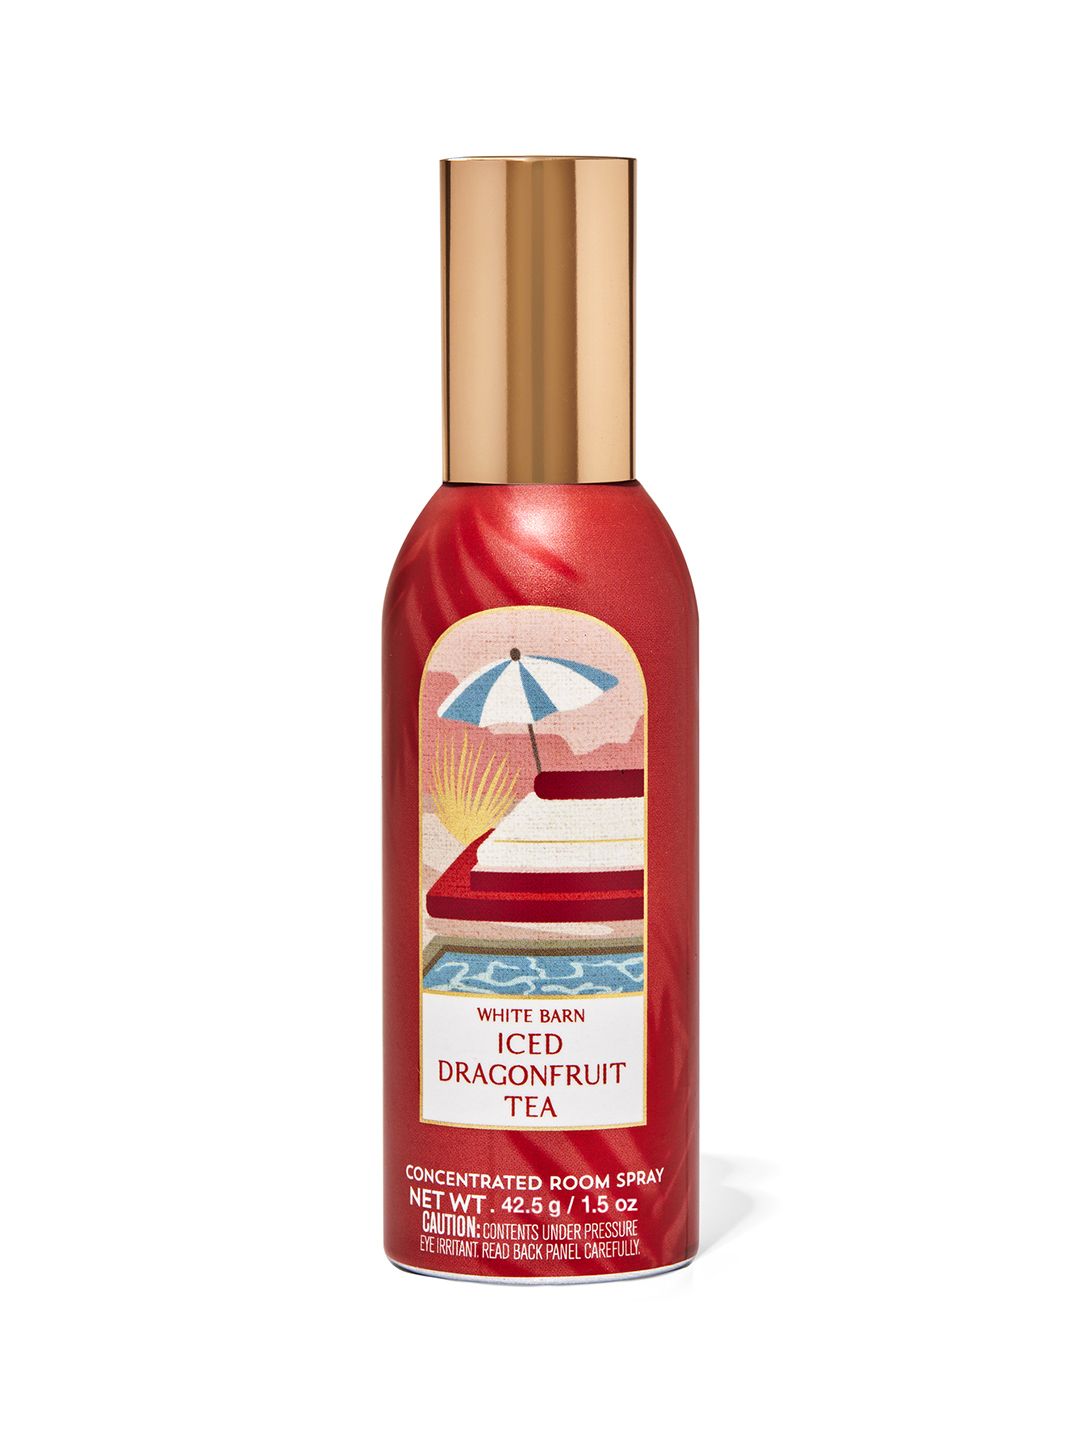 Bath & Body Works Iced Dragonfruit Tea Concentrated Room Spray - 42.5g Price in India